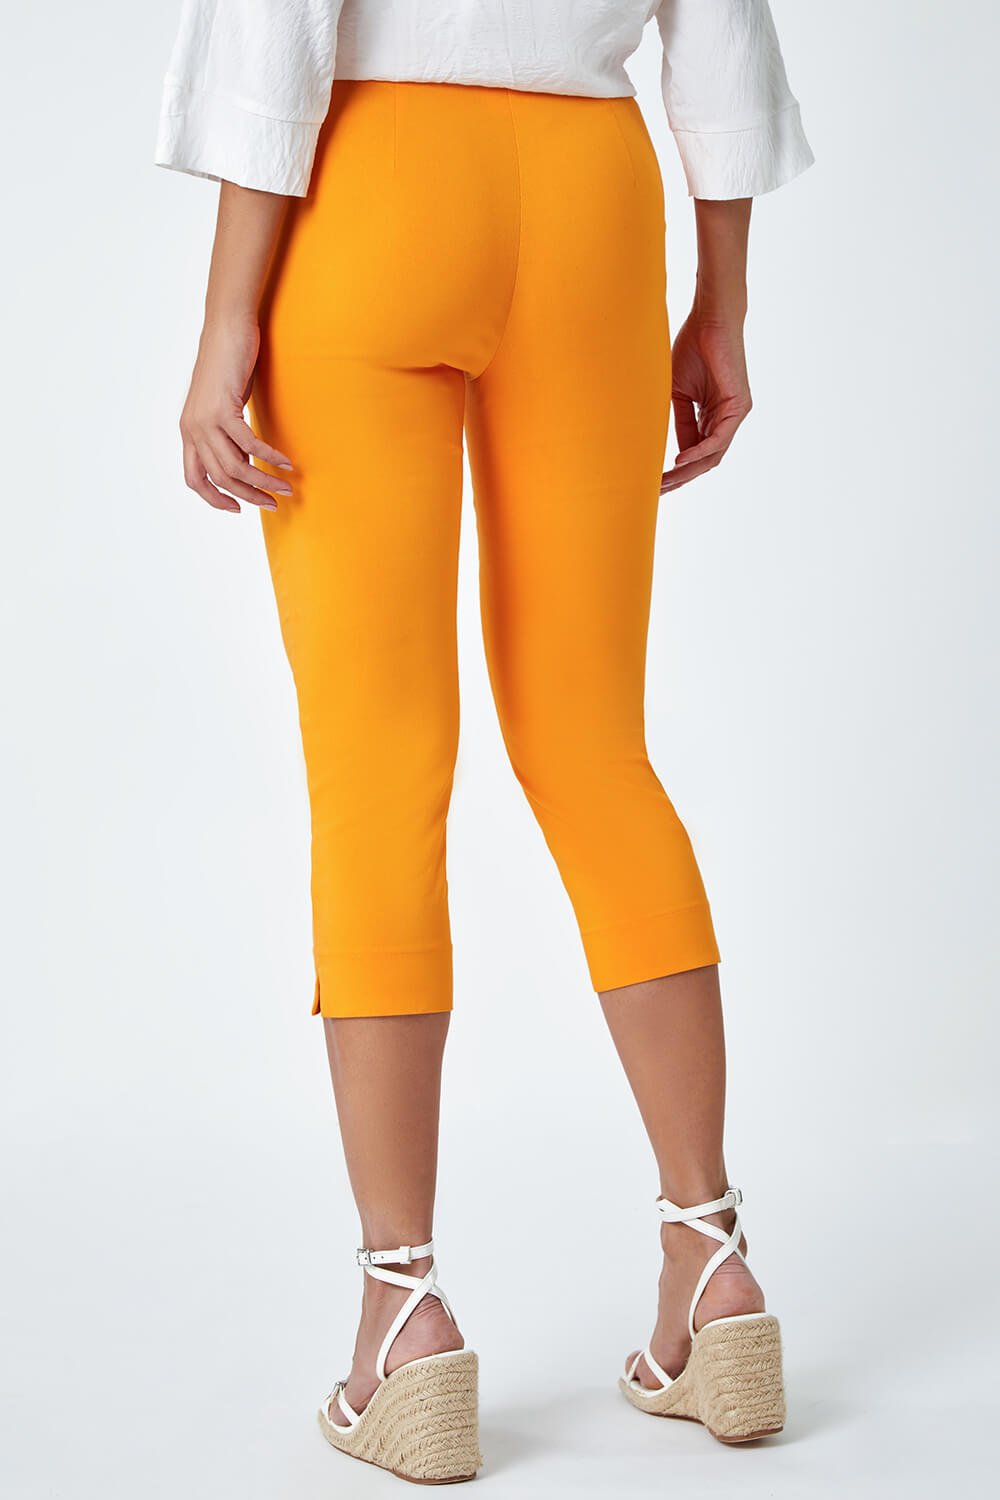 MANGO Cropped Stretch Trousers, Image 3 of 5